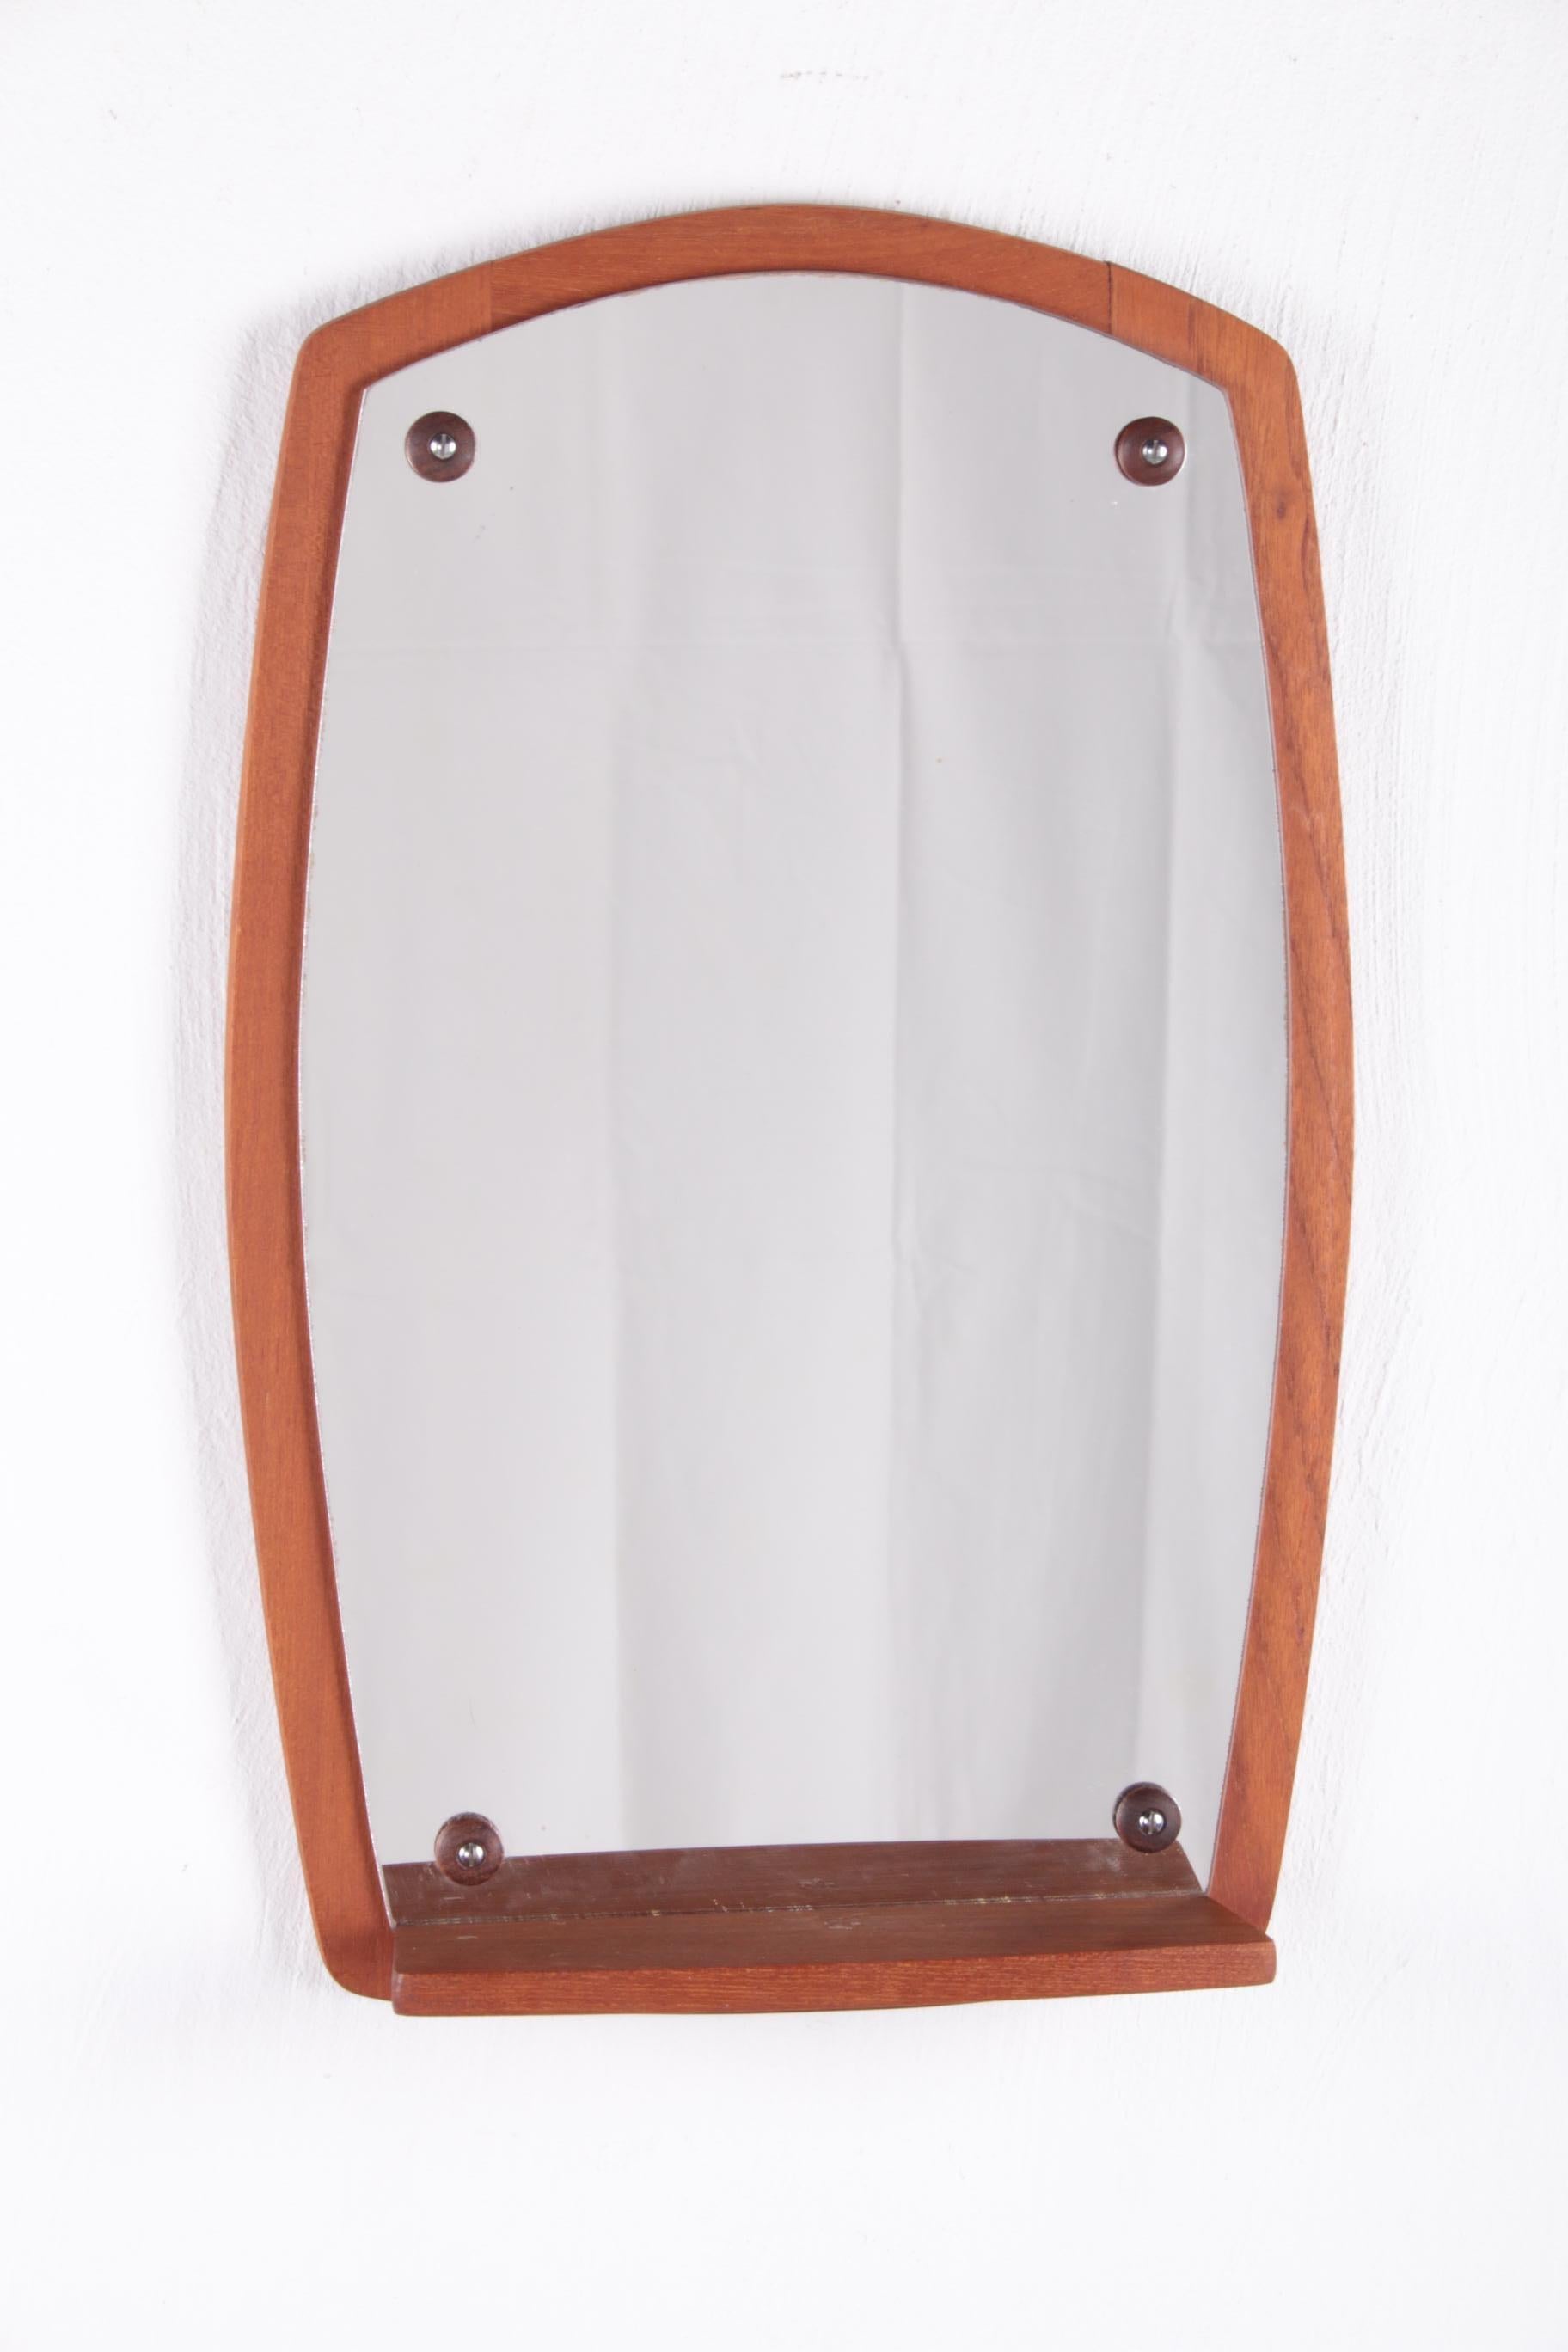 This is a beautiful teak wooden wall mirror with a beautiful wooden shelf attached to it.
Are you missing a mirror somewhere on the wall, we have a topper here.
A nice detail is the wooden ball around the screw.